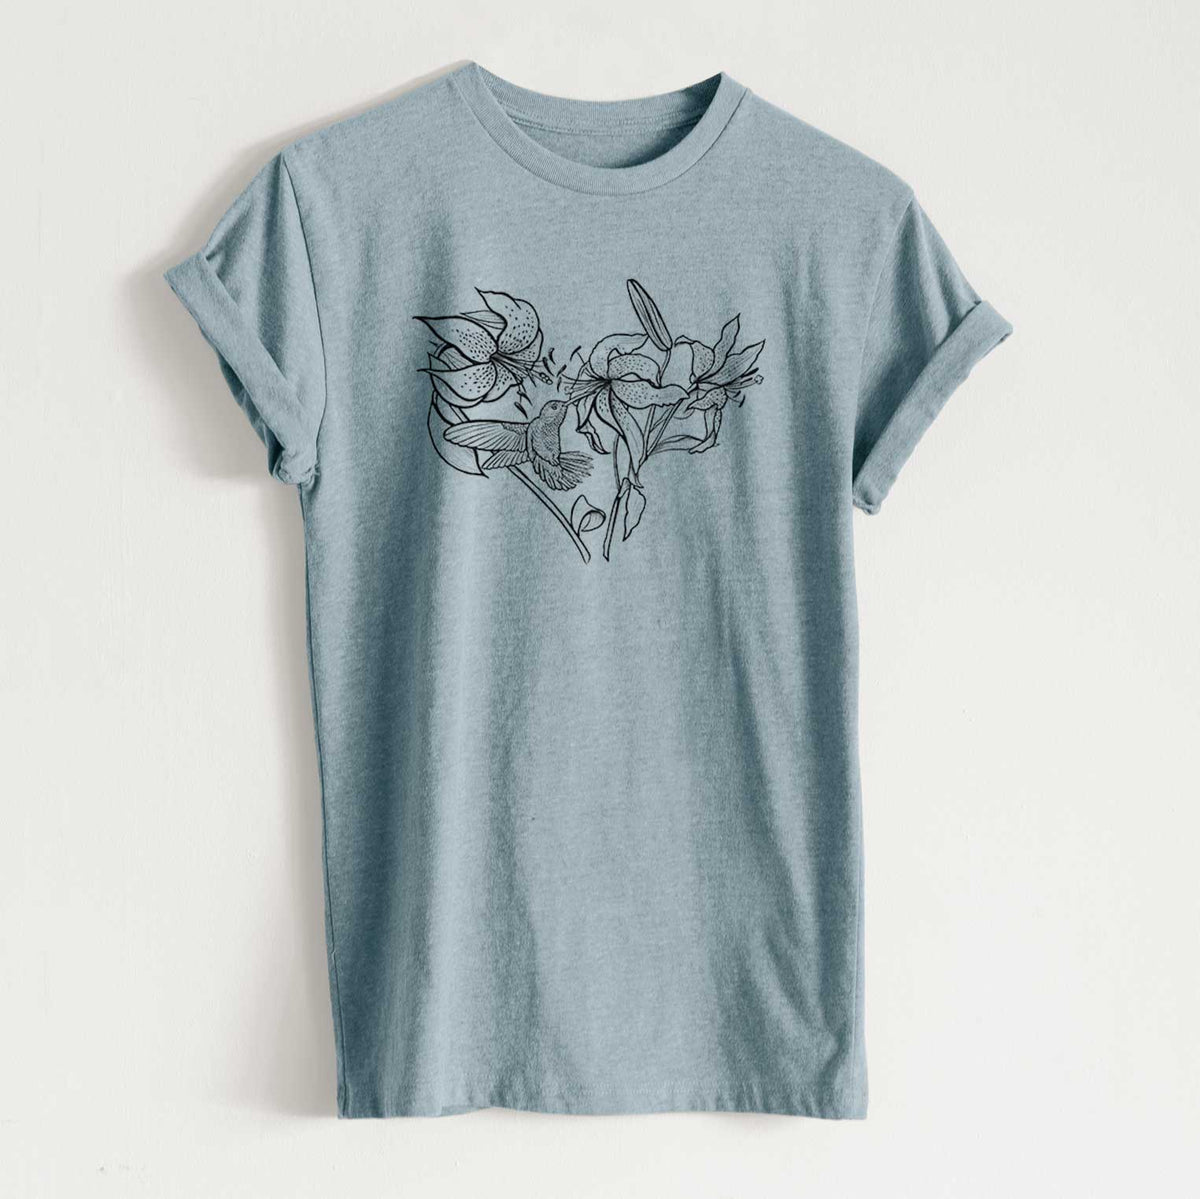 Hummingbird with Lillies Heart - Unisex Recycled Eco Tee  - CLOSEOUT - FINAL SALE